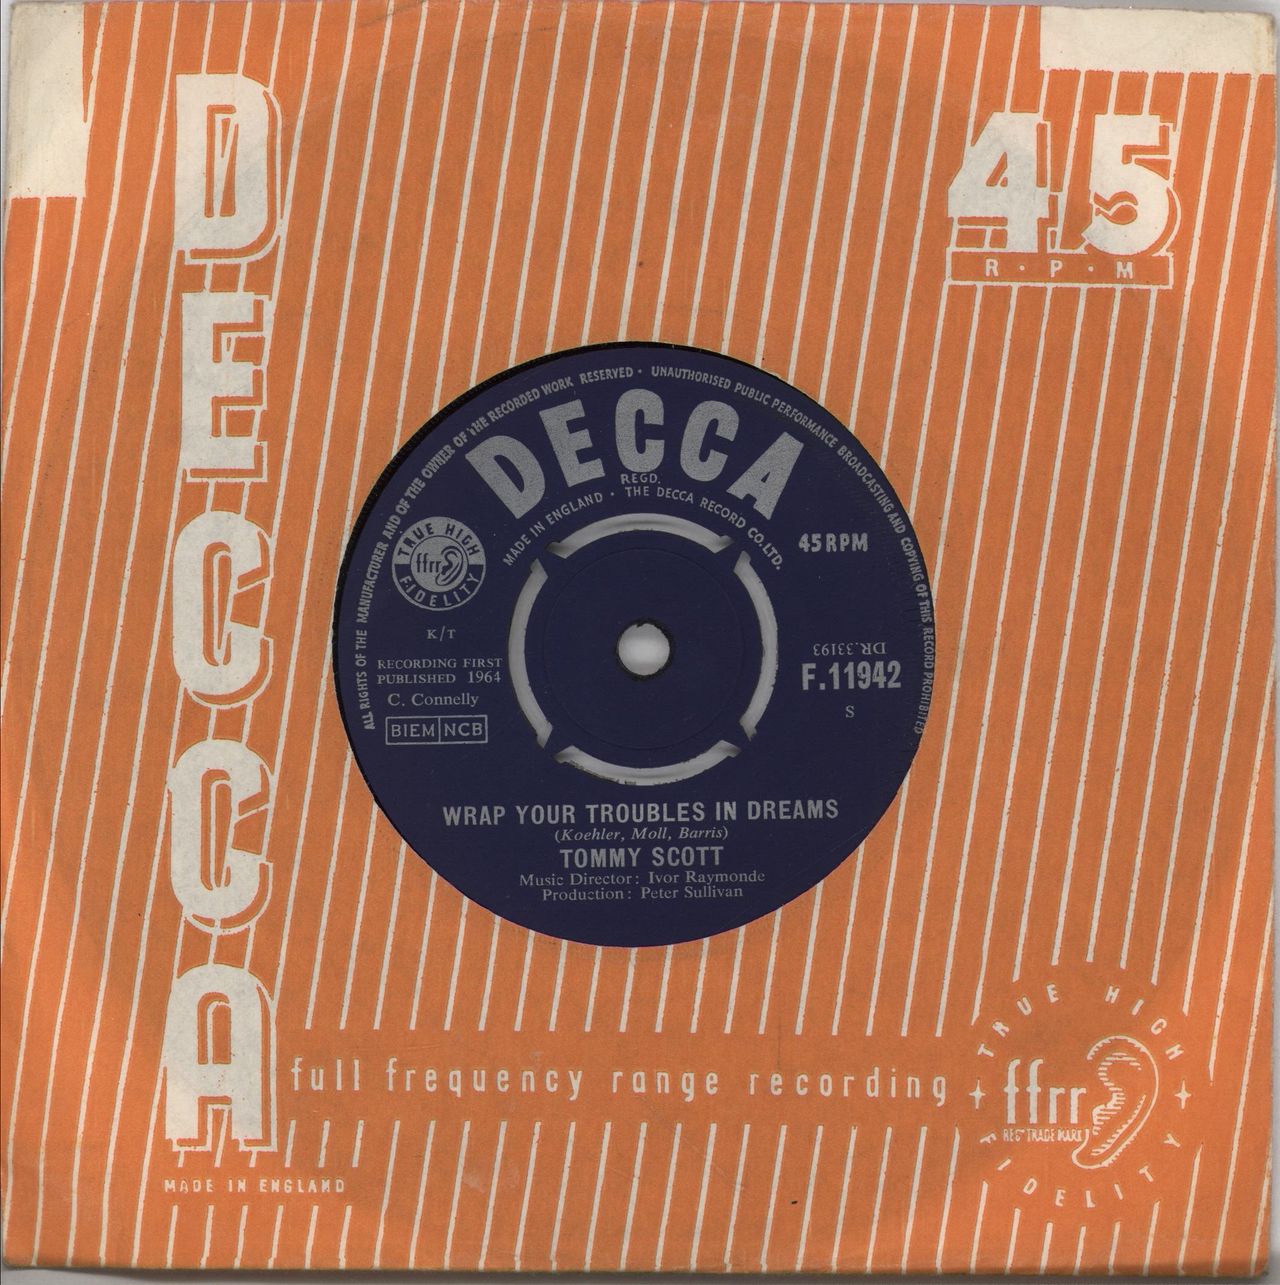 Tommy Scott Wrap Your Troubles In Dreams UK 7" vinyl single (7 inch record / 45) F.11942